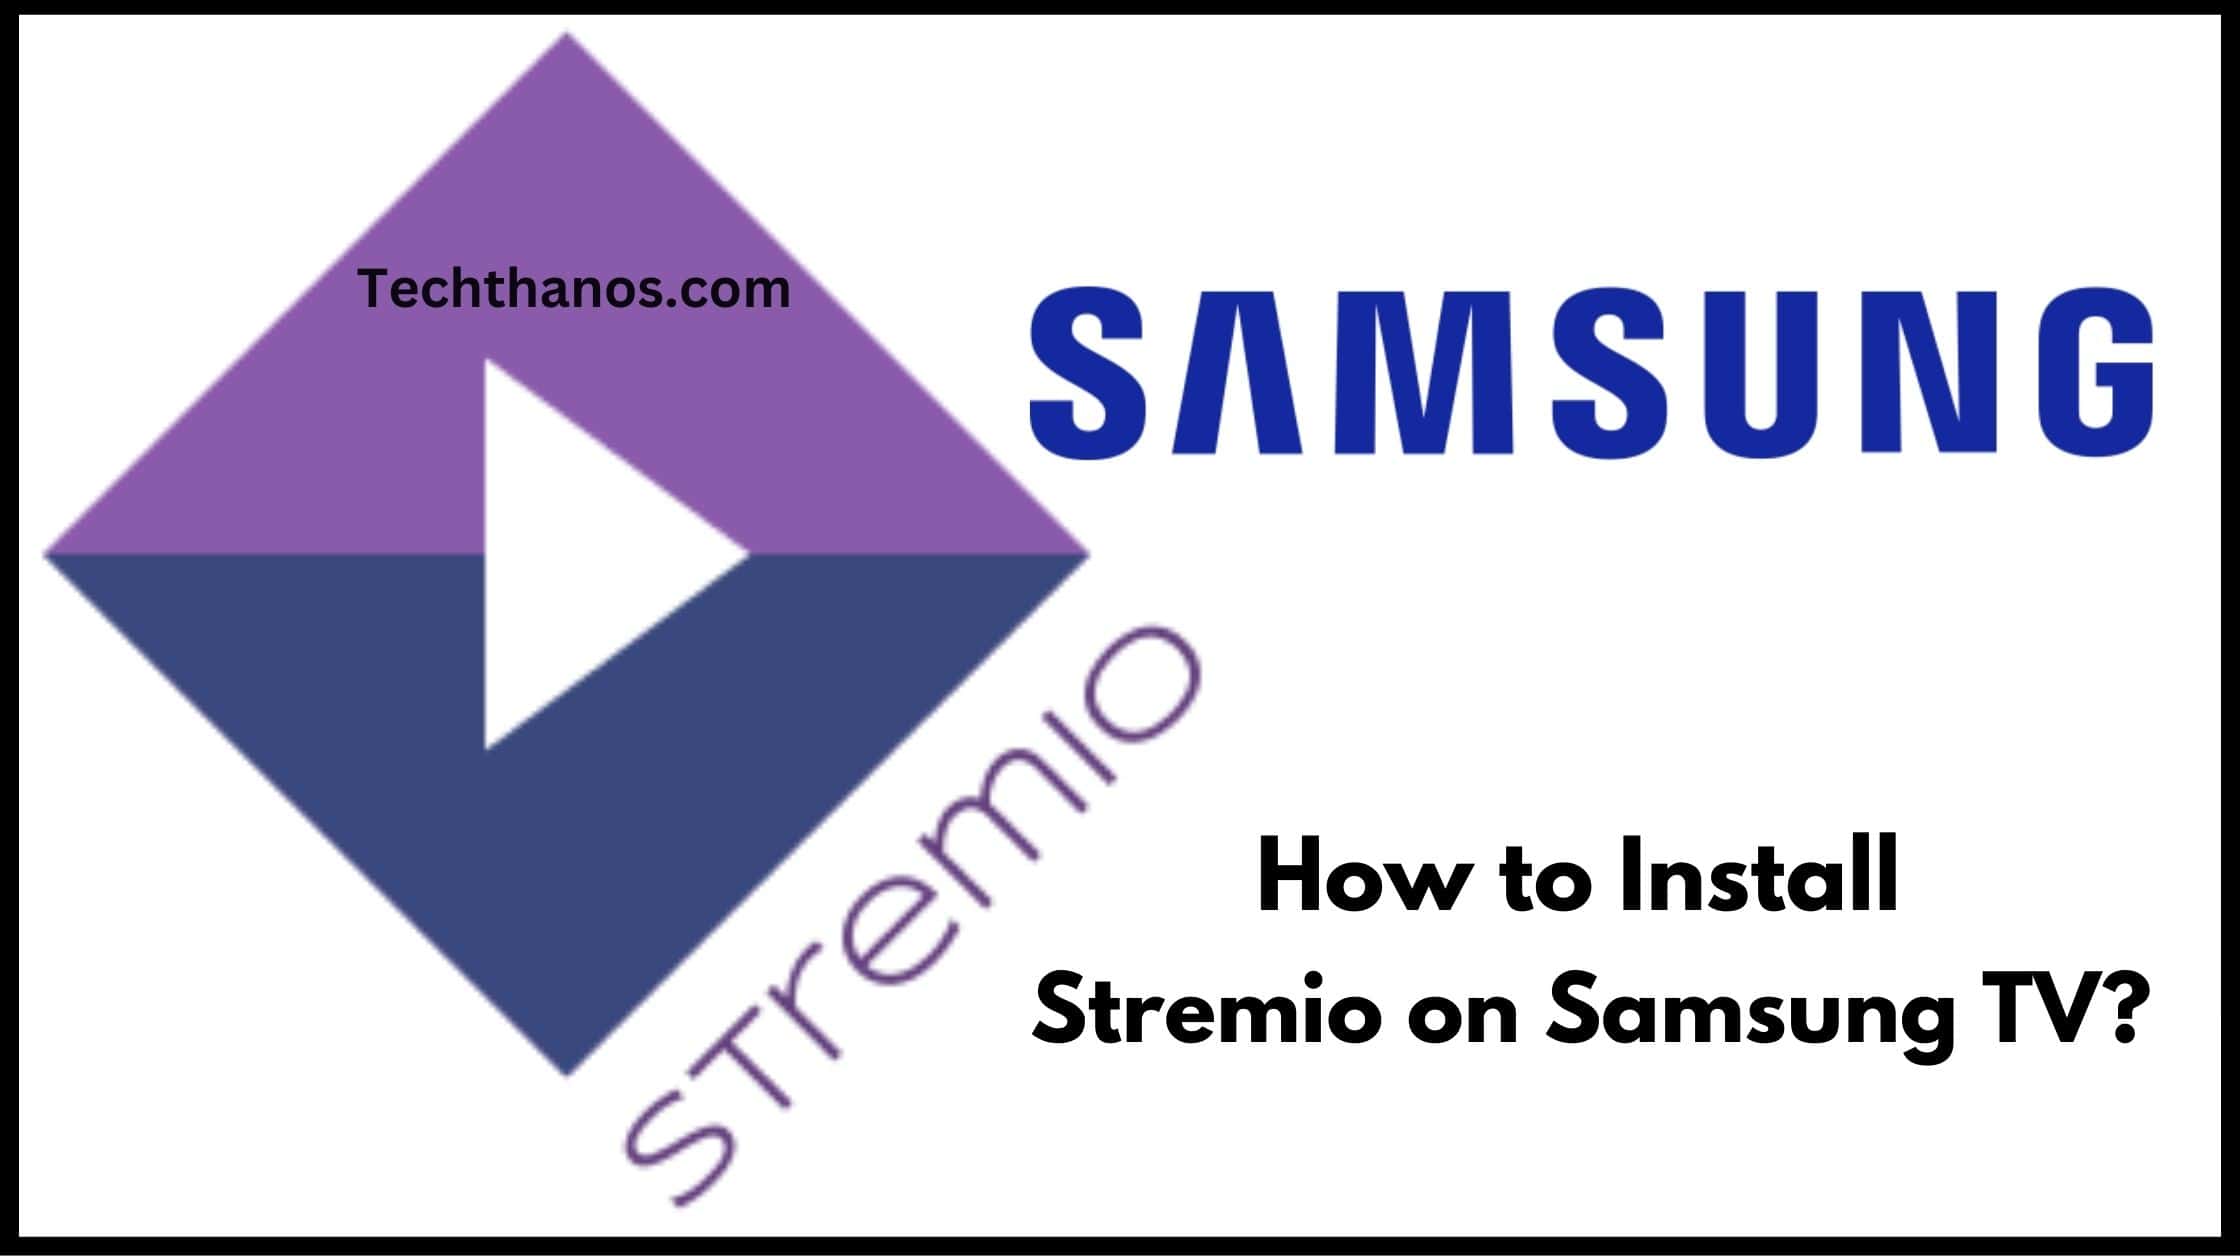 How to Install Stremio on Samsung TV?